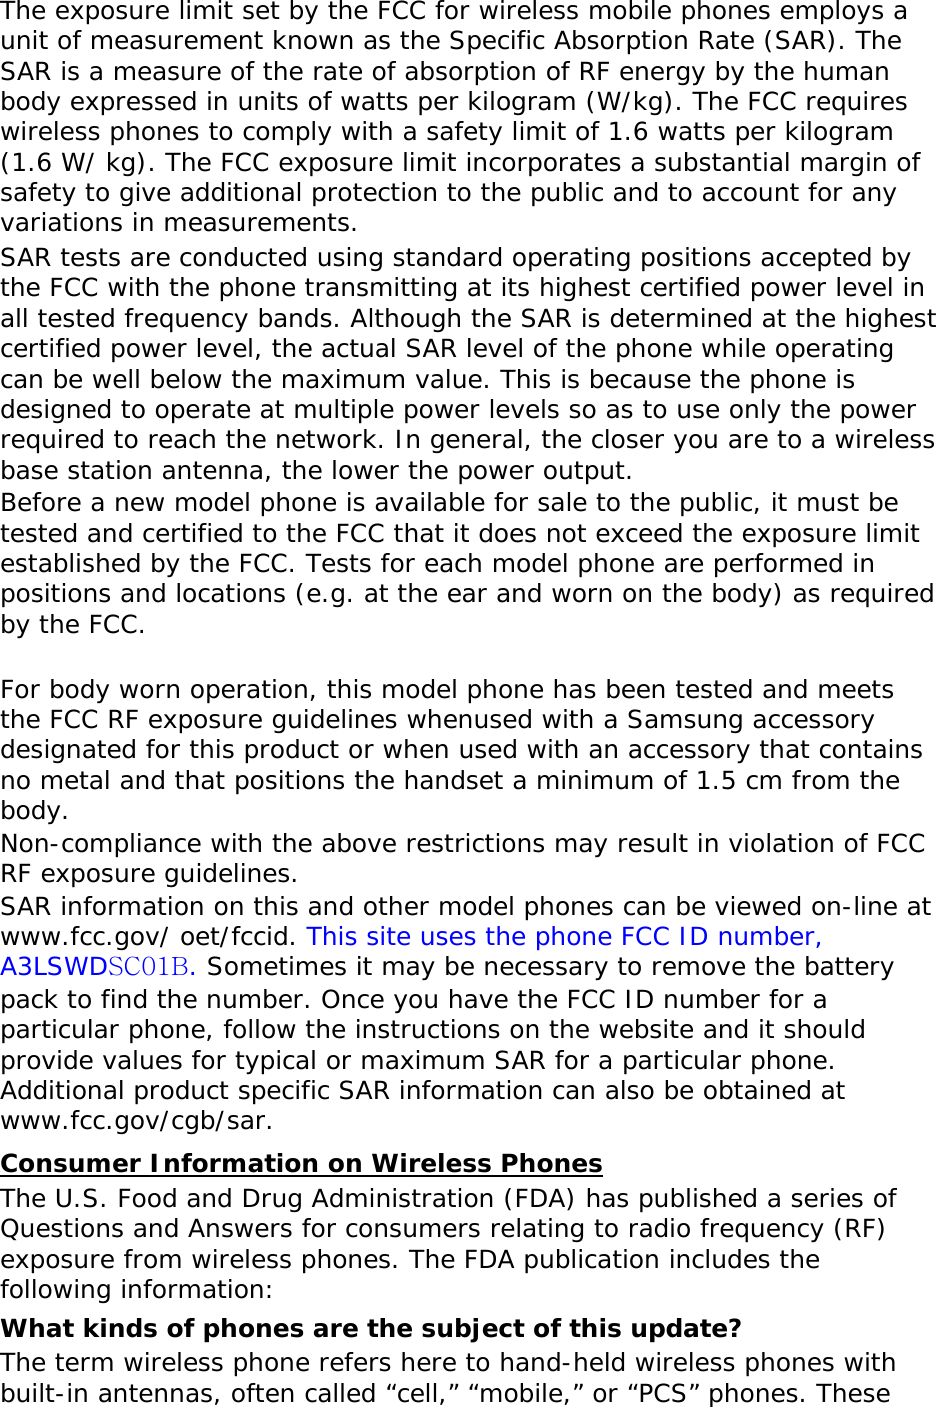 The exposure limit set by the FCC for wireless mobile phones employs a unit of measurement known as the Specific Absorption Rate (SAR). The SAR is a measure of the rate of absorption of RF energy by the human body expressed in units of watts per kilogram (W/kg). The FCC requires wireless phones to comply with a safety limit of 1.6 watts per kilogram (1.6 W/ kg). The FCC exposure limit incorporates a substantial margin of safety to give additional protection to the public and to account for any variations in measurements. SAR tests are conducted using standard operating positions accepted by the FCC with the phone transmitting at its highest certified power level in all tested frequency bands. Although the SAR is determined at the highest certified power level, the actual SAR level of the phone while operating can be well below the maximum value. This is because the phone is designed to operate at multiple power levels so as to use only the power required to reach the network. In general, the closer you are to a wireless base station antenna, the lower the power output. Before a new model phone is available for sale to the public, it must be tested and certified to the FCC that it does not exceed the exposure limit established by the FCC. Tests for each model phone are performed in positions and locations (e.g. at the ear and worn on the body) as required by the FCC.    For body worn operation, this model phone has been tested and meets the FCC RF exposure guidelines whenused with a Samsung accessory designated for this product or when used with an accessory that contains no metal and that positions the handset a minimum of 1.5 cm from the body.  Non-compliance with the above restrictions may result in violation of FCC RF exposure guidelines. SAR information on this and other model phones can be viewed on-line at www.fcc.gov/ oet/fccid. This site uses the phone FCC ID number, A3LSWDSC01B. Sometimes it may be necessary to remove the battery pack to find the number. Once you have the FCC ID number for a particular phone, follow the instructions on the website and it should provide values for typical or maximum SAR for a particular phone. Additional product specific SAR information can also be obtained at www.fcc.gov/cgb/sar. Consumer Information on Wireless Phones The U.S. Food and Drug Administration (FDA) has published a series of Questions and Answers for consumers relating to radio frequency (RF) exposure from wireless phones. The FDA publication includes the following information: What kinds of phones are the subject of this update? The term wireless phone refers here to hand-held wireless phones with built-in antennas, often called “cell,” “mobile,” or “PCS” phones. These 